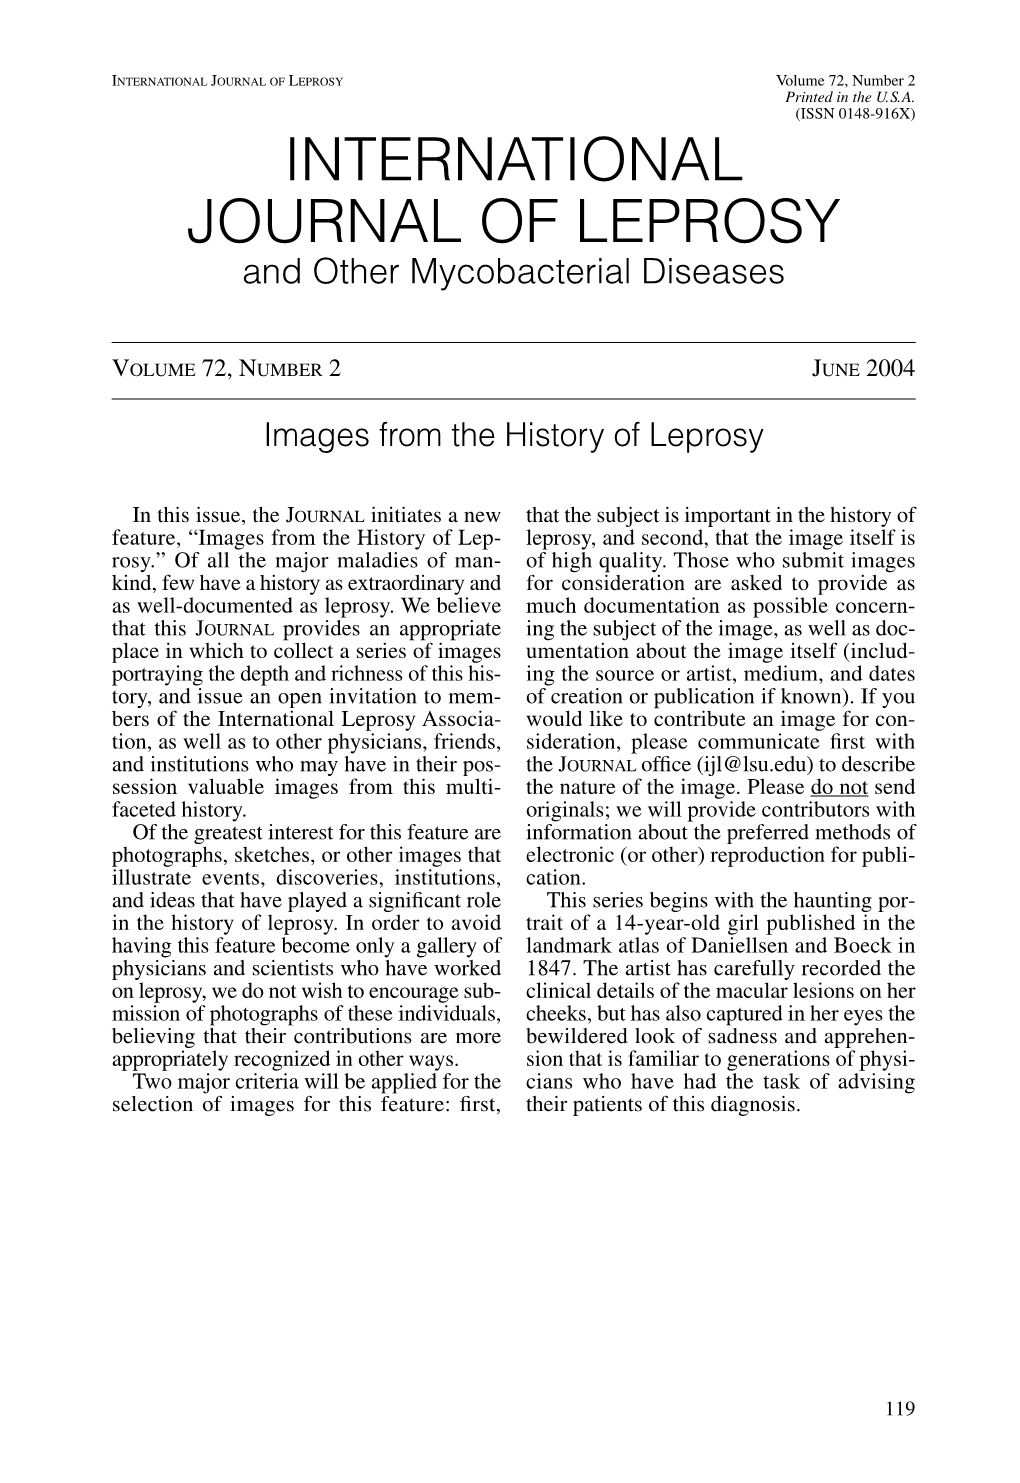 INTERNATIONAL JOURNAL of LEPROSY Volume 72, Number 2 Printed in the U.S.A